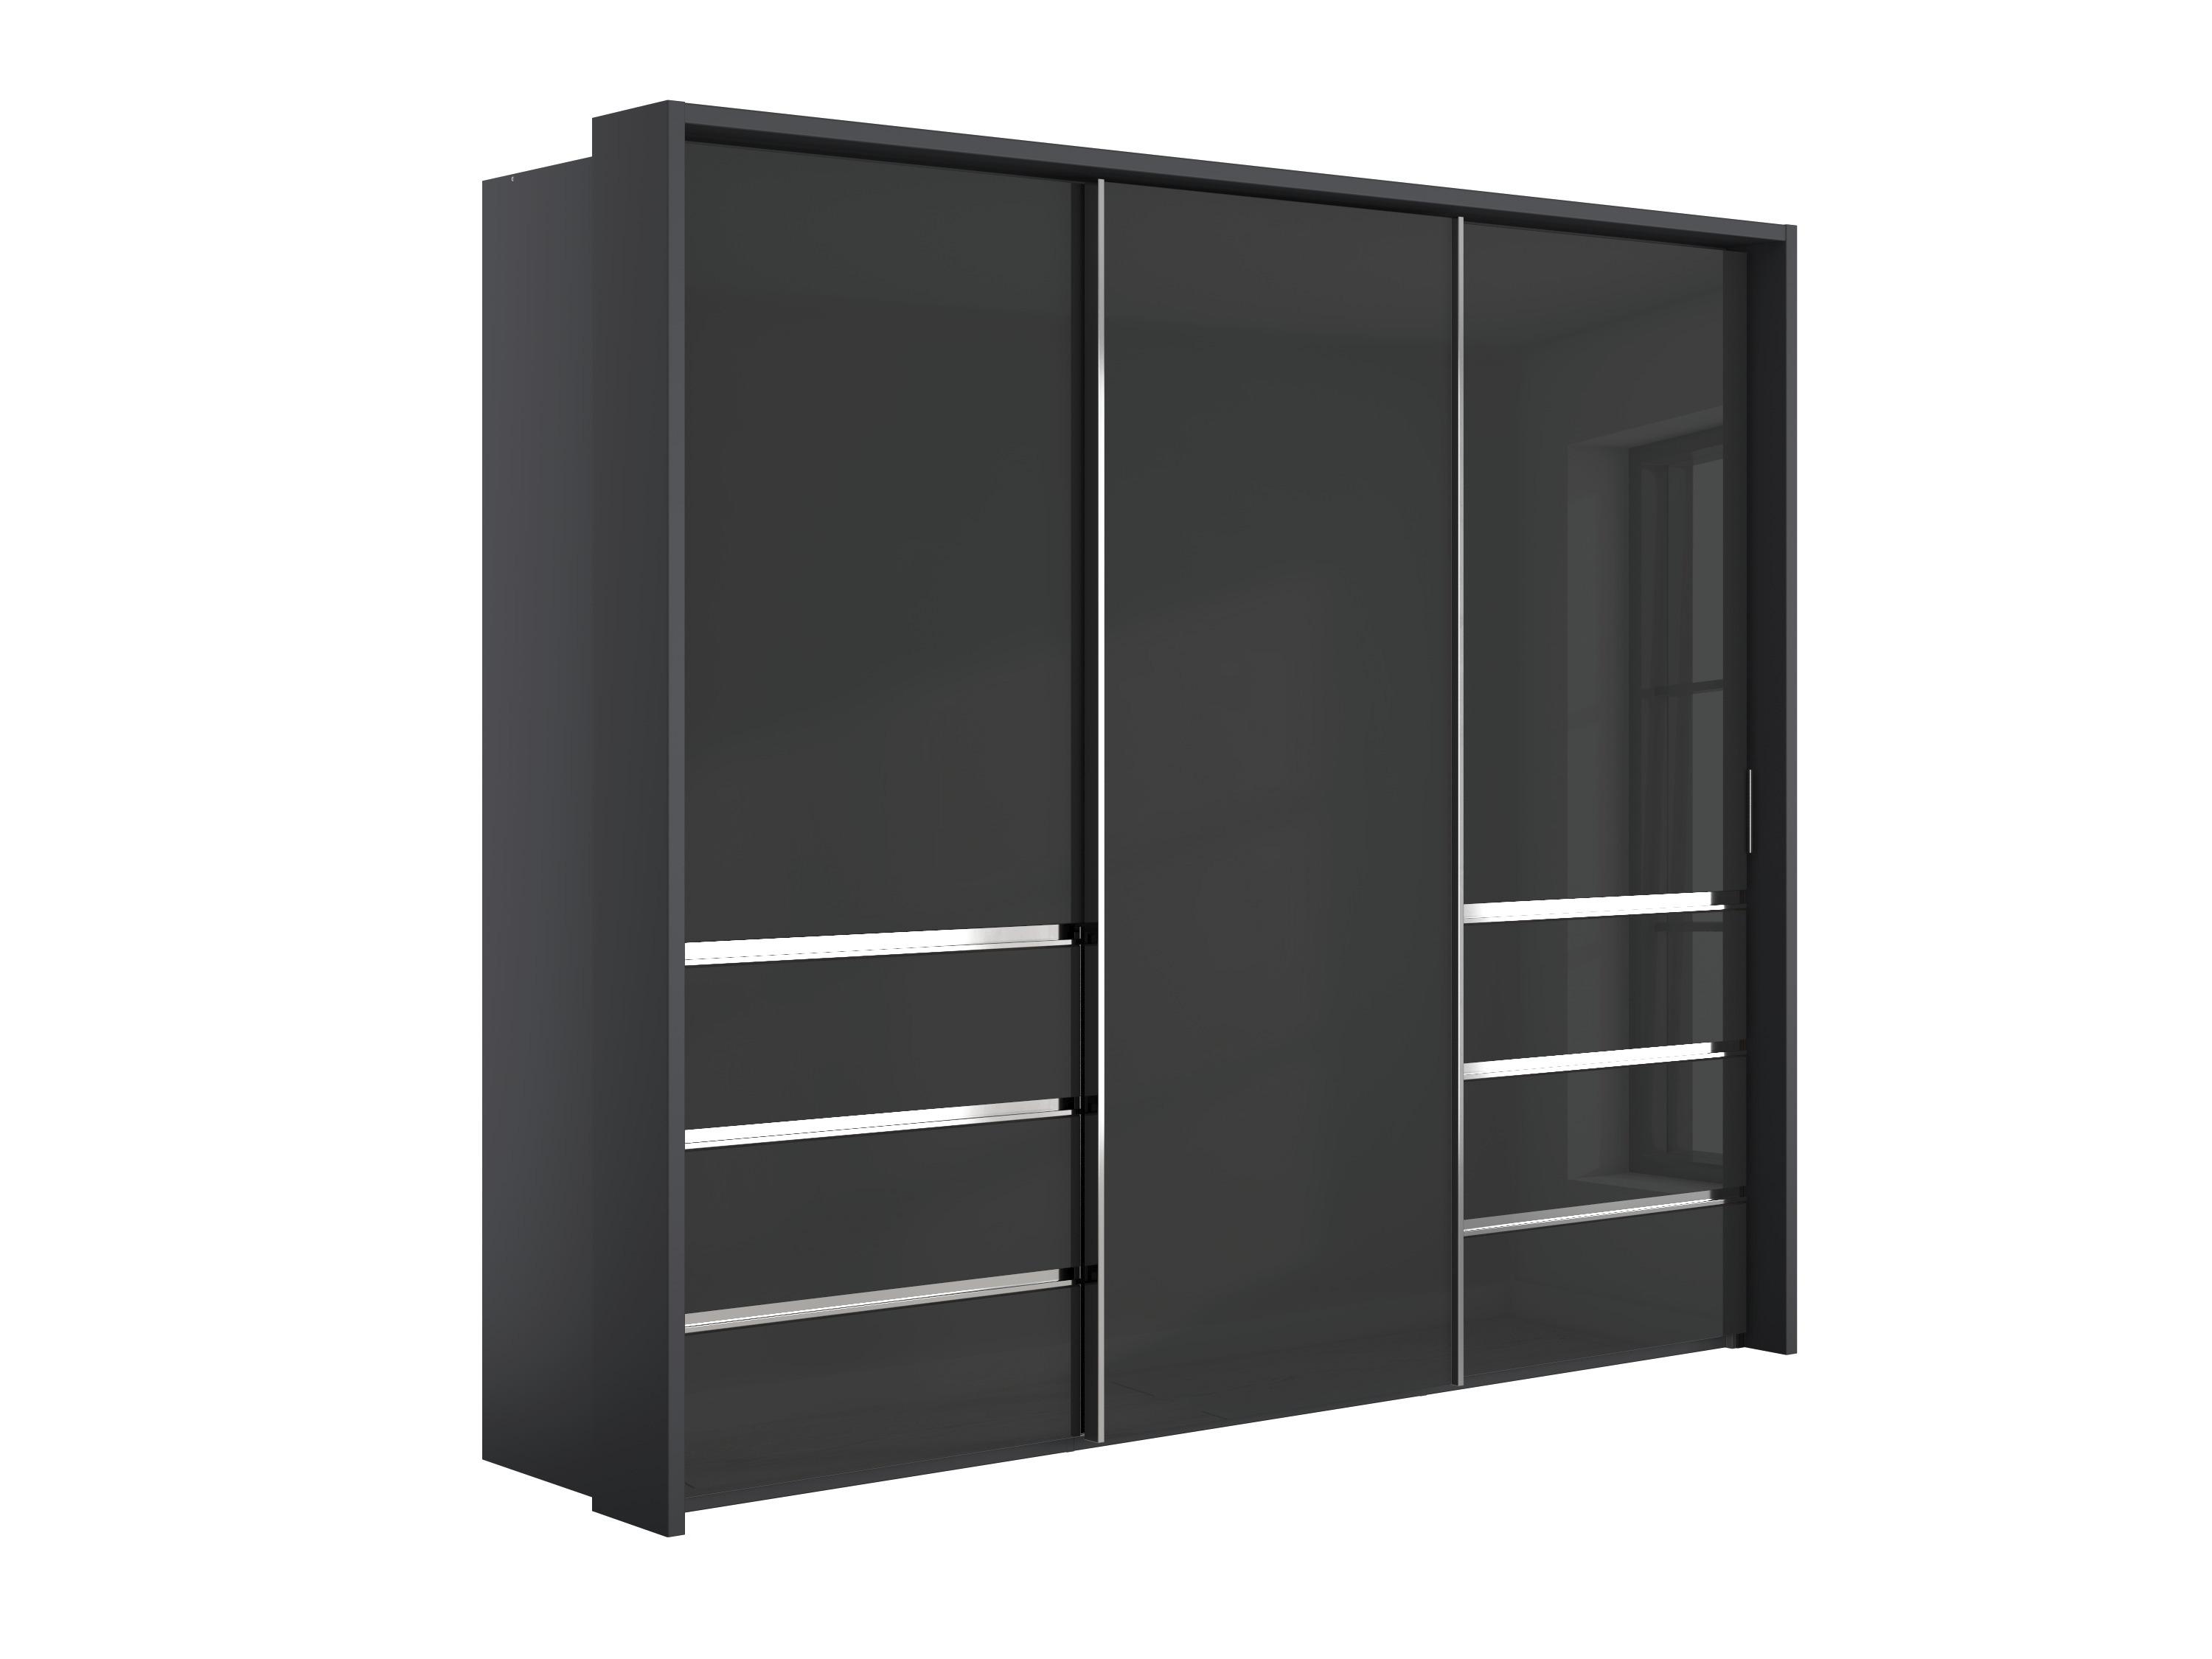 Pacifica 2 260cm 3 Door Sliding Wardrobe with Drawers at Left and Right in Graphite/Glass Graphite on Furniture Village